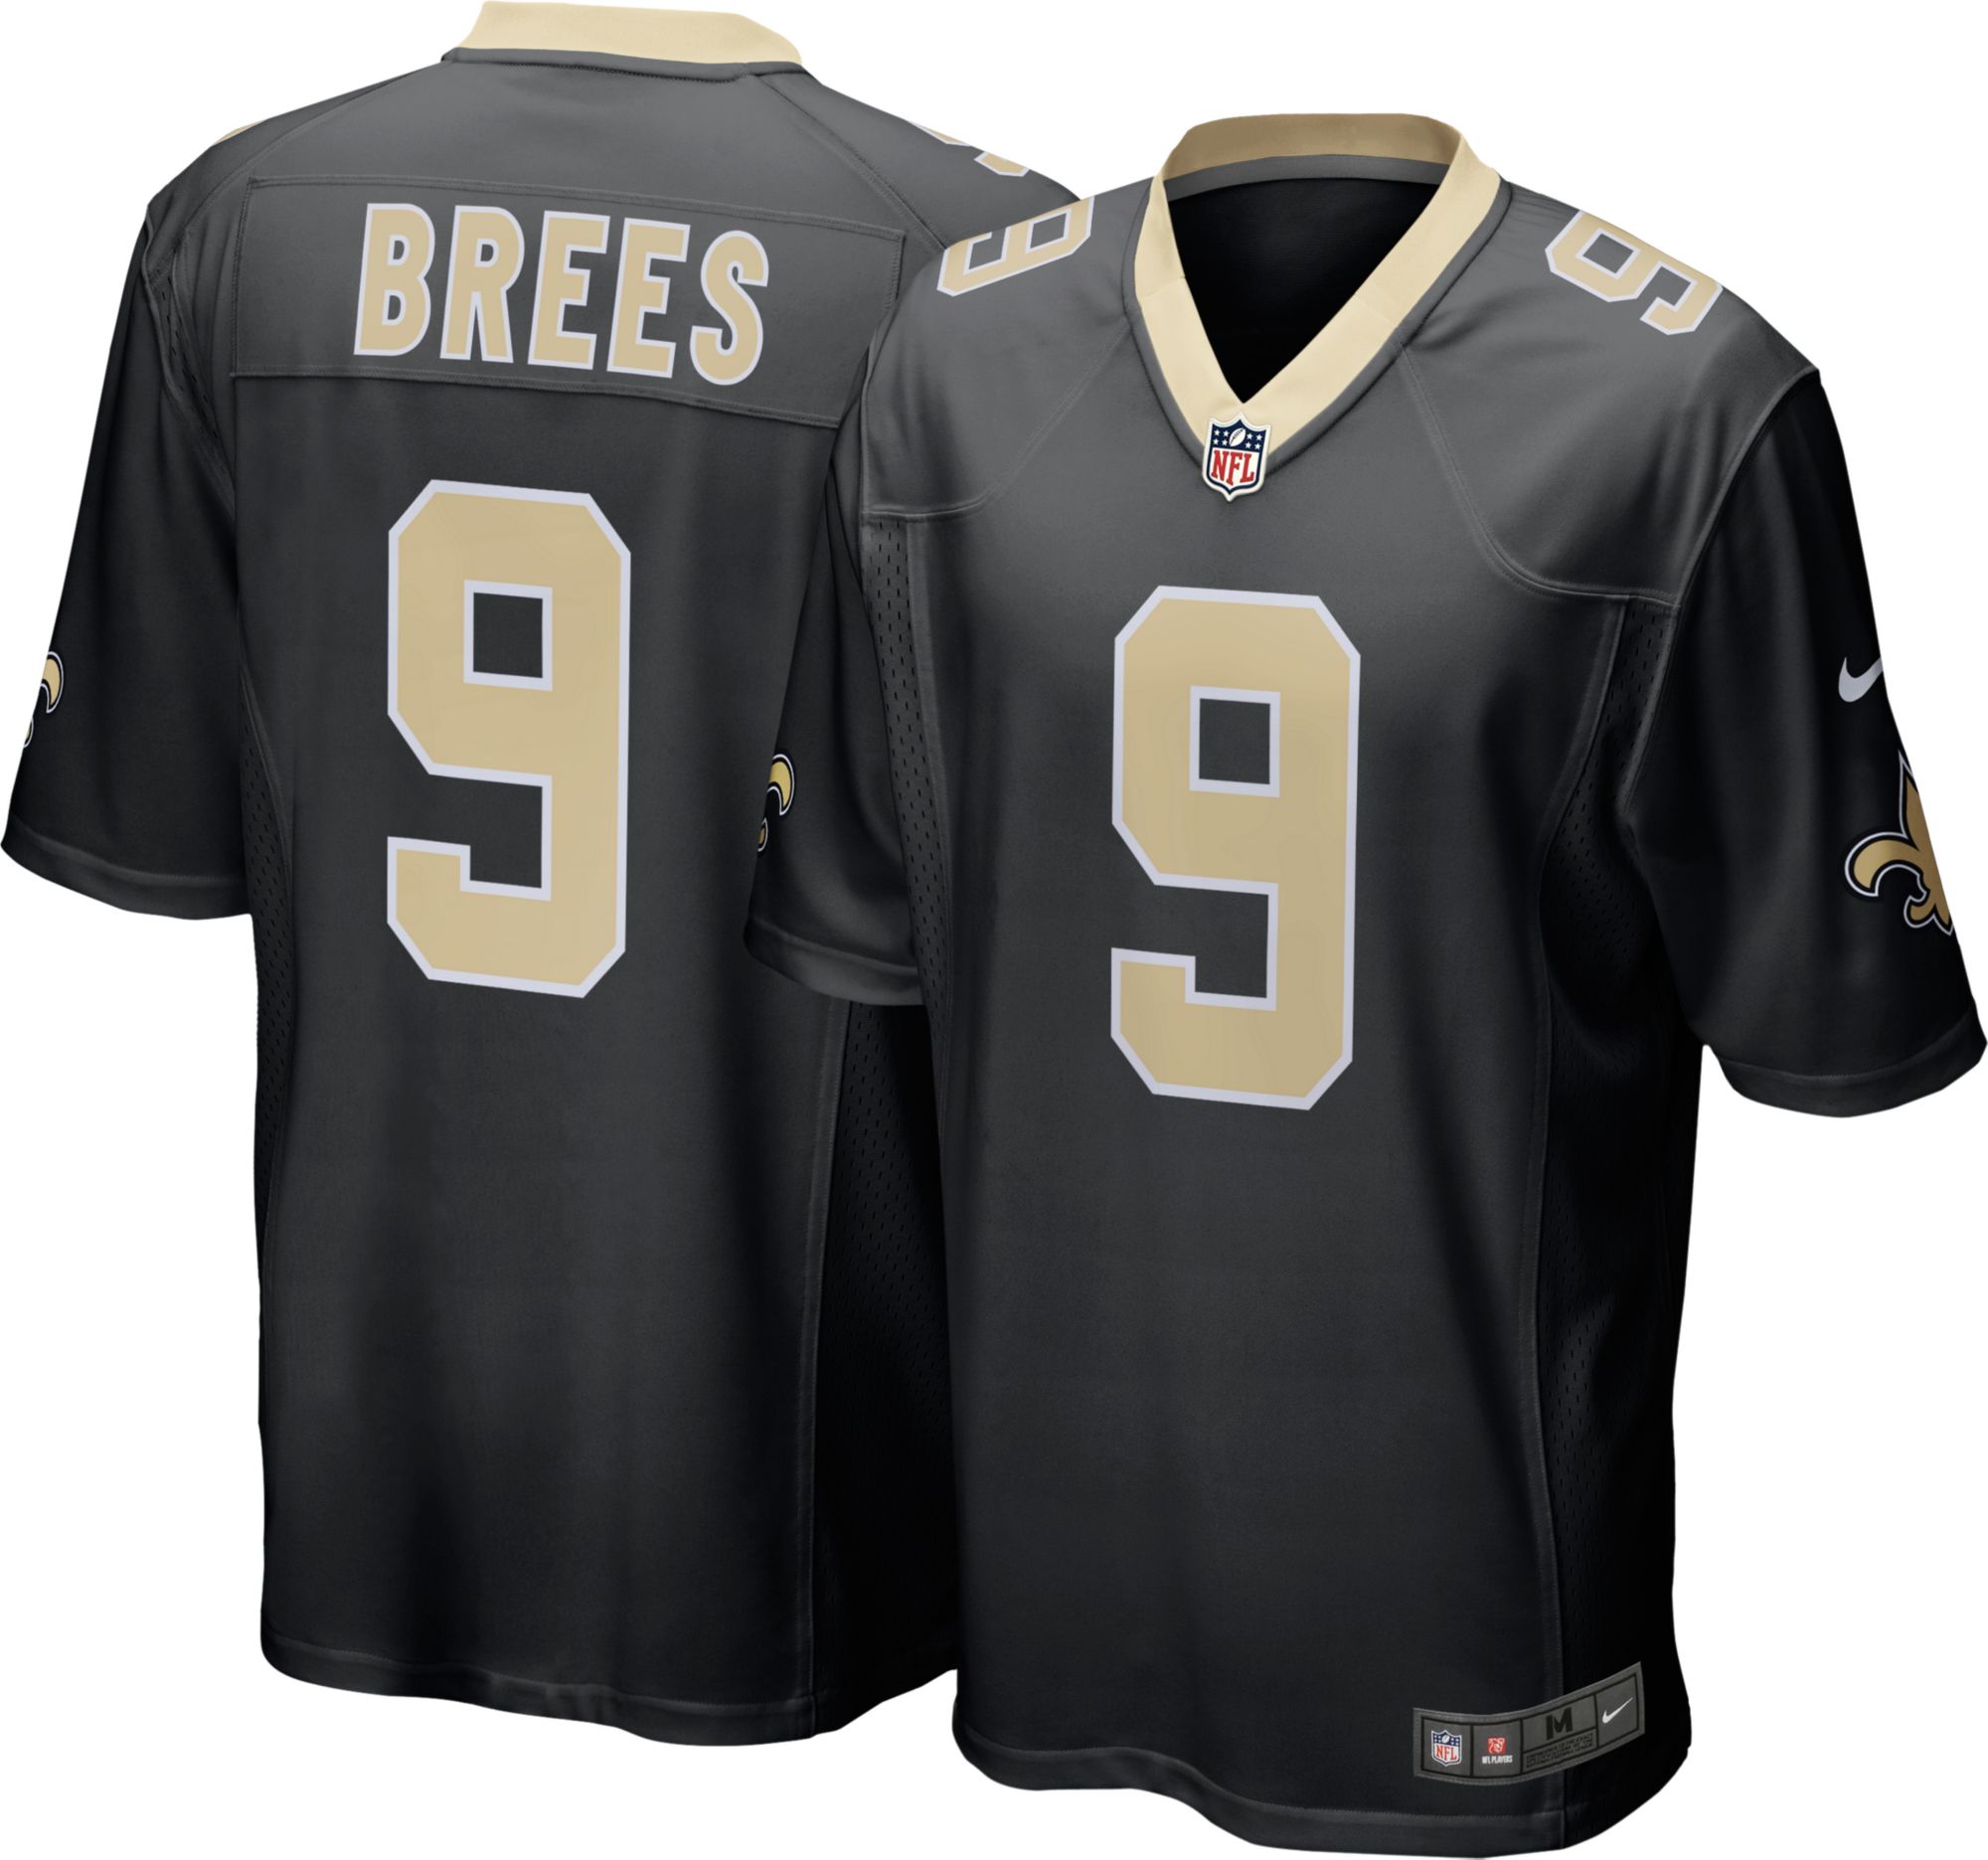 nfl brees jersey